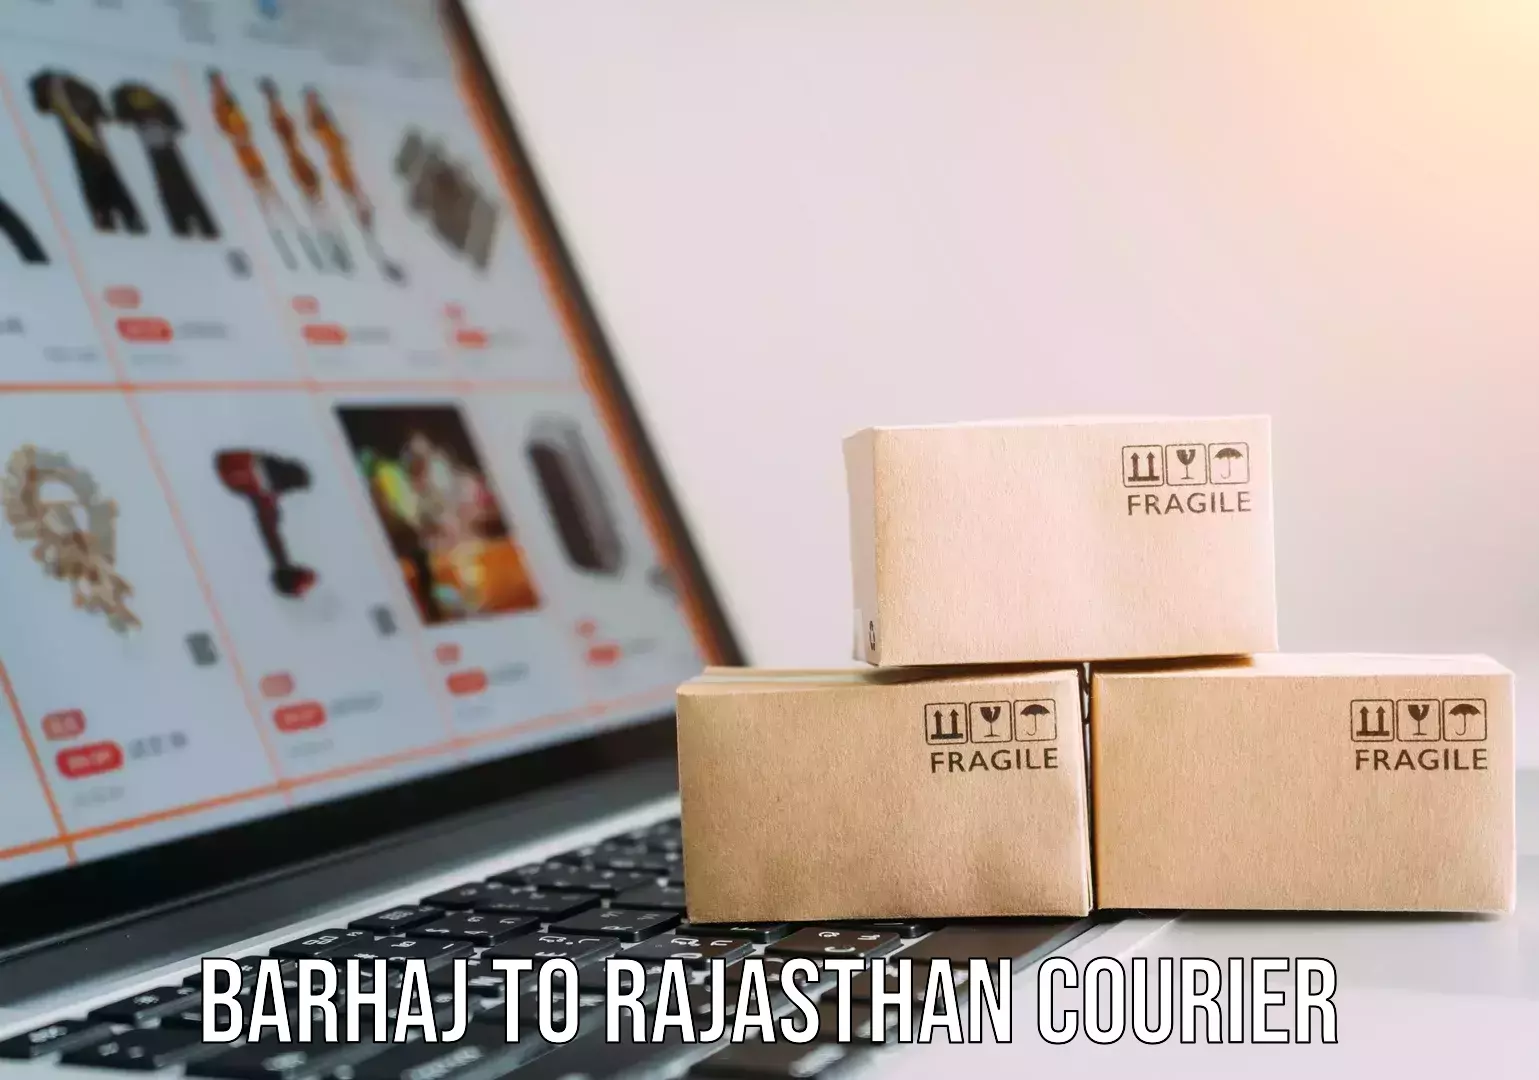 Cash on delivery service Barhaj to Rajasthan